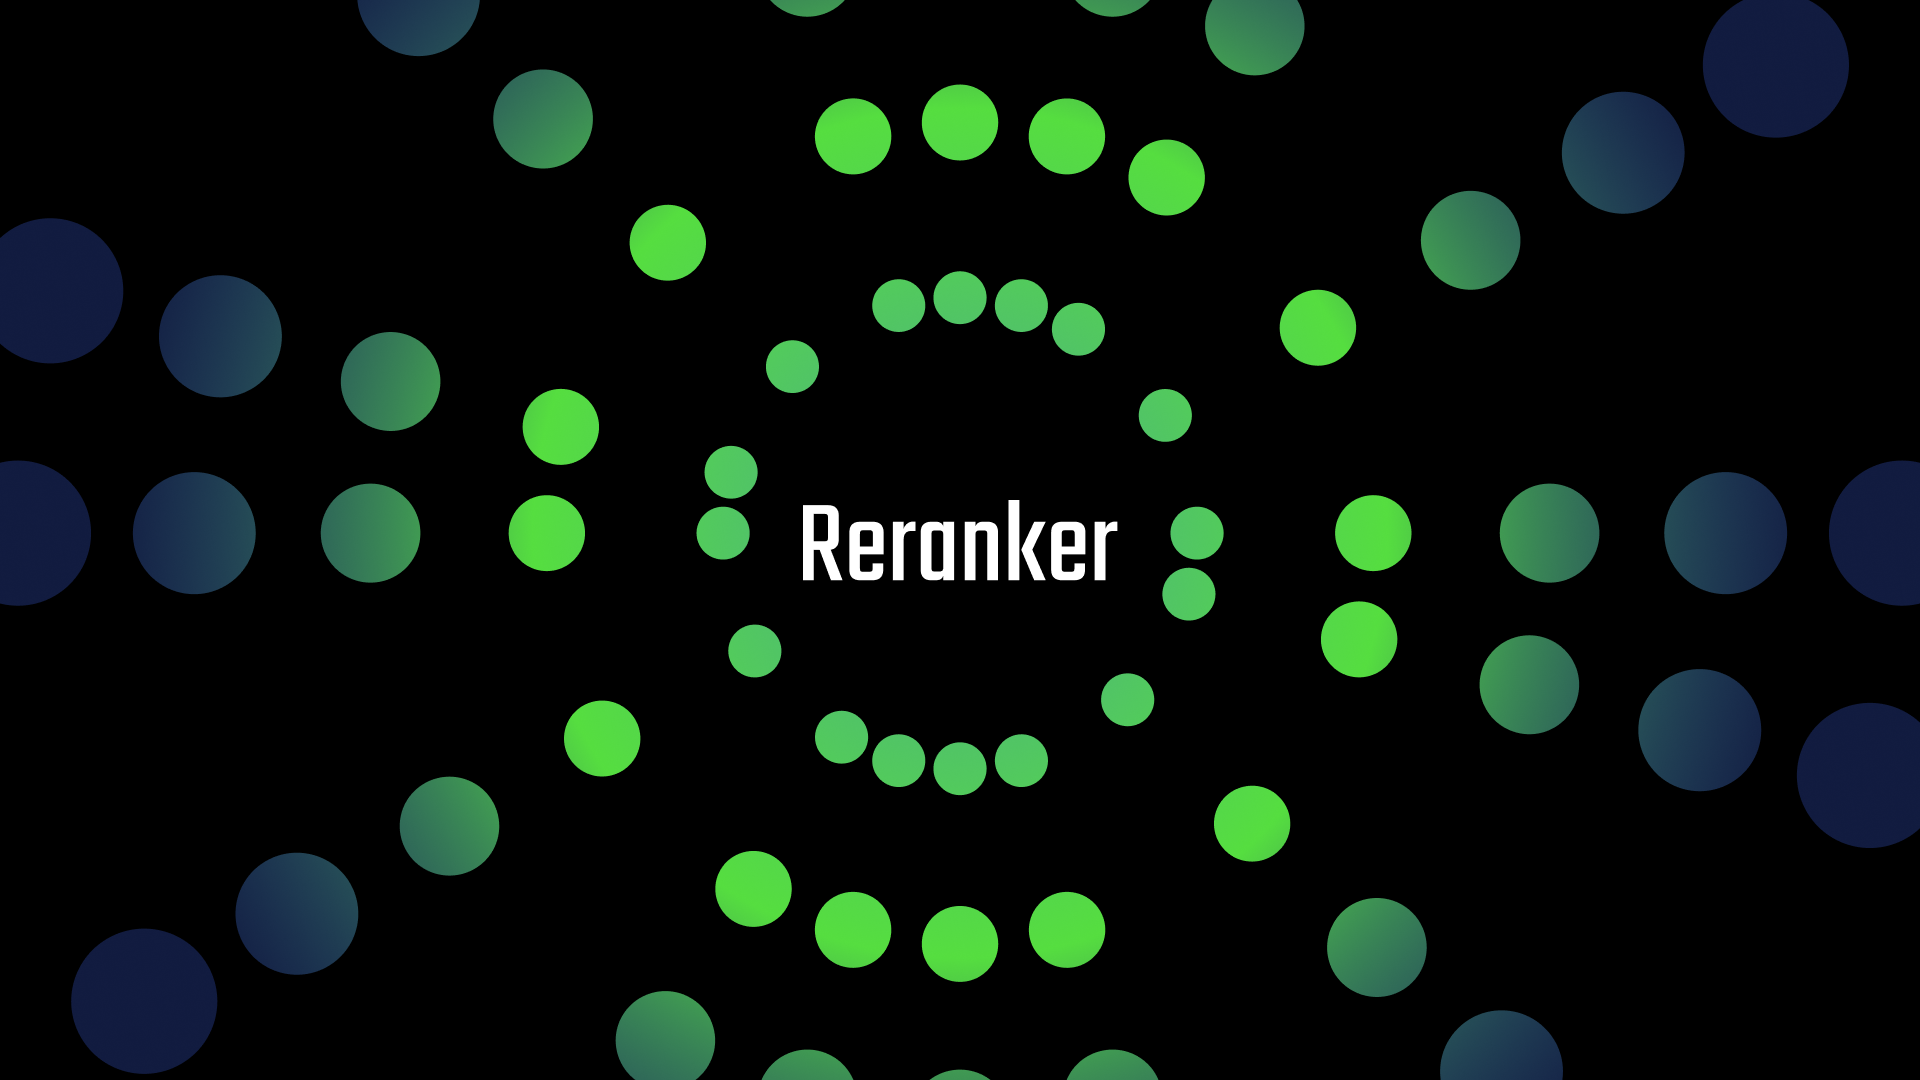 Abstract design with "Reranker" in white, centered on a black background, surrounded by green and blue dots forming circles.